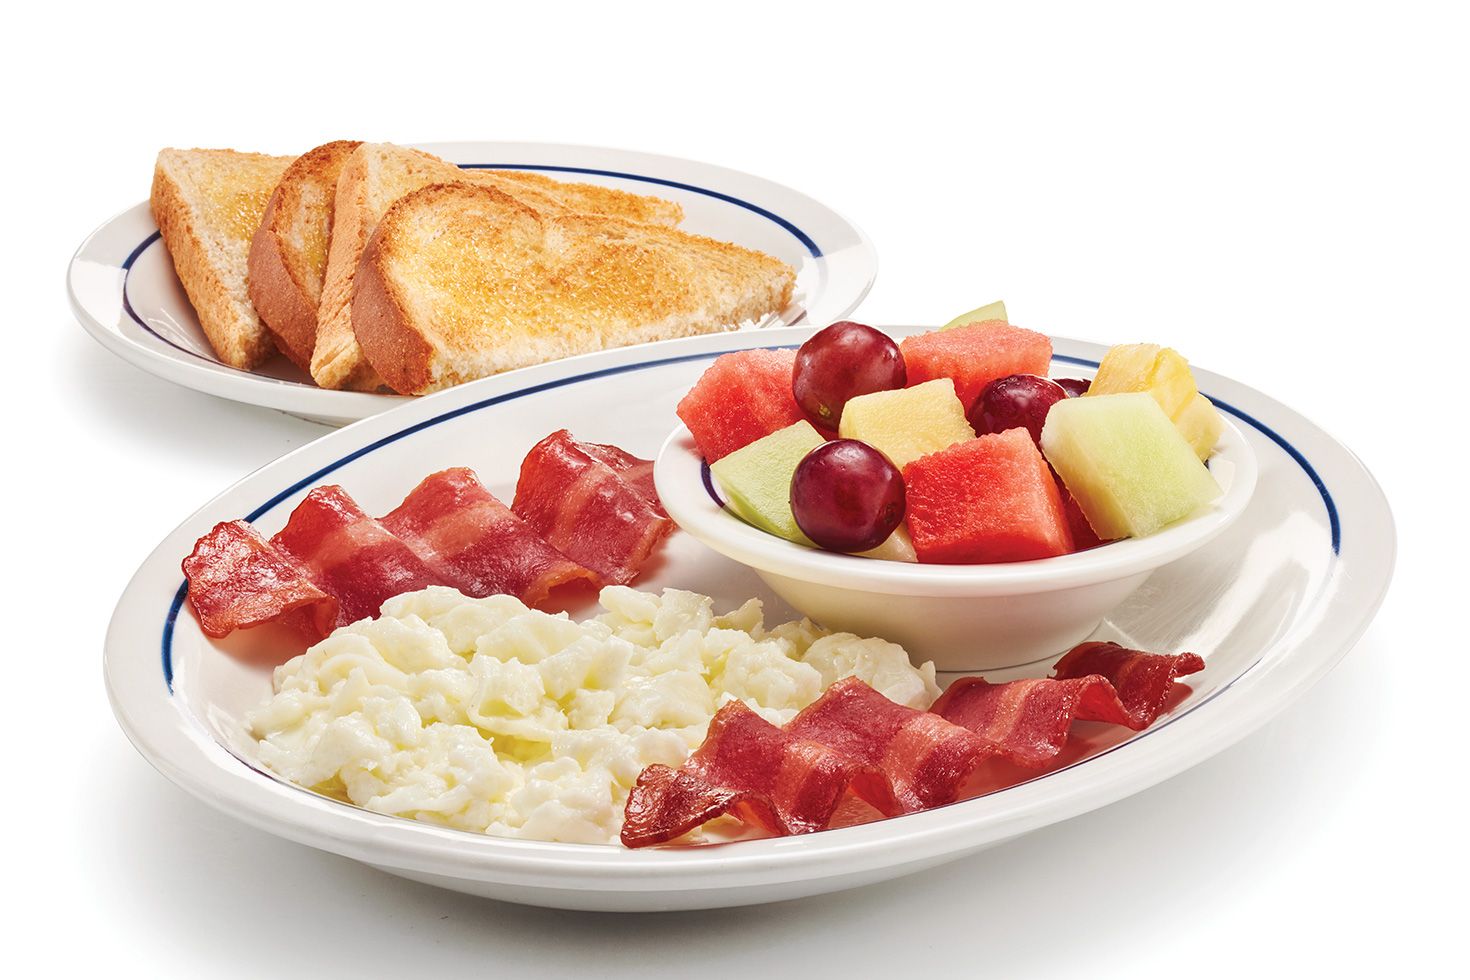 What are the Best Healthy Options at IHOP?